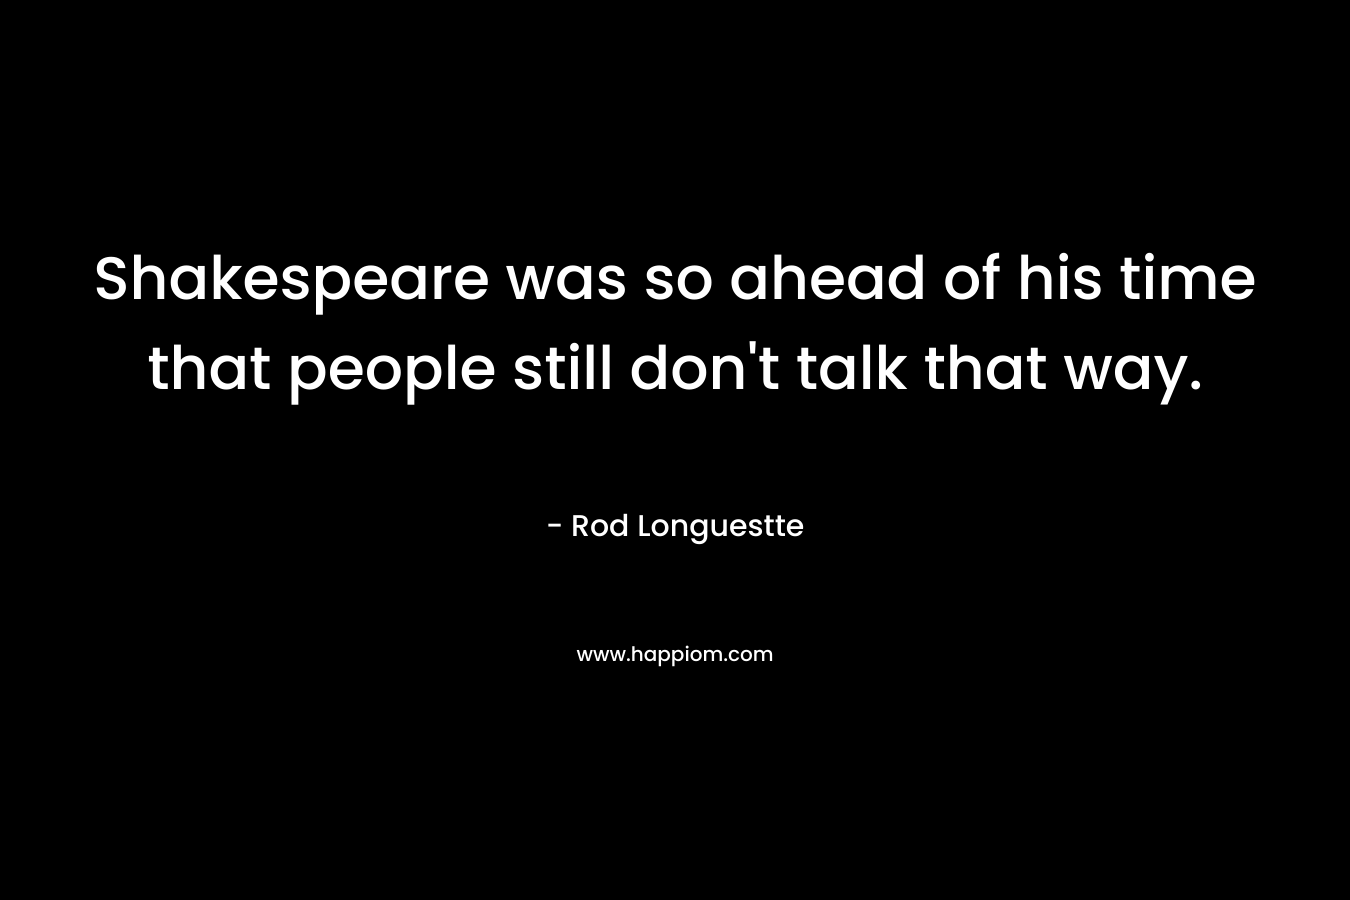 Shakespeare was so ahead of his time that people still don’t talk that way. – Rod Longuestte